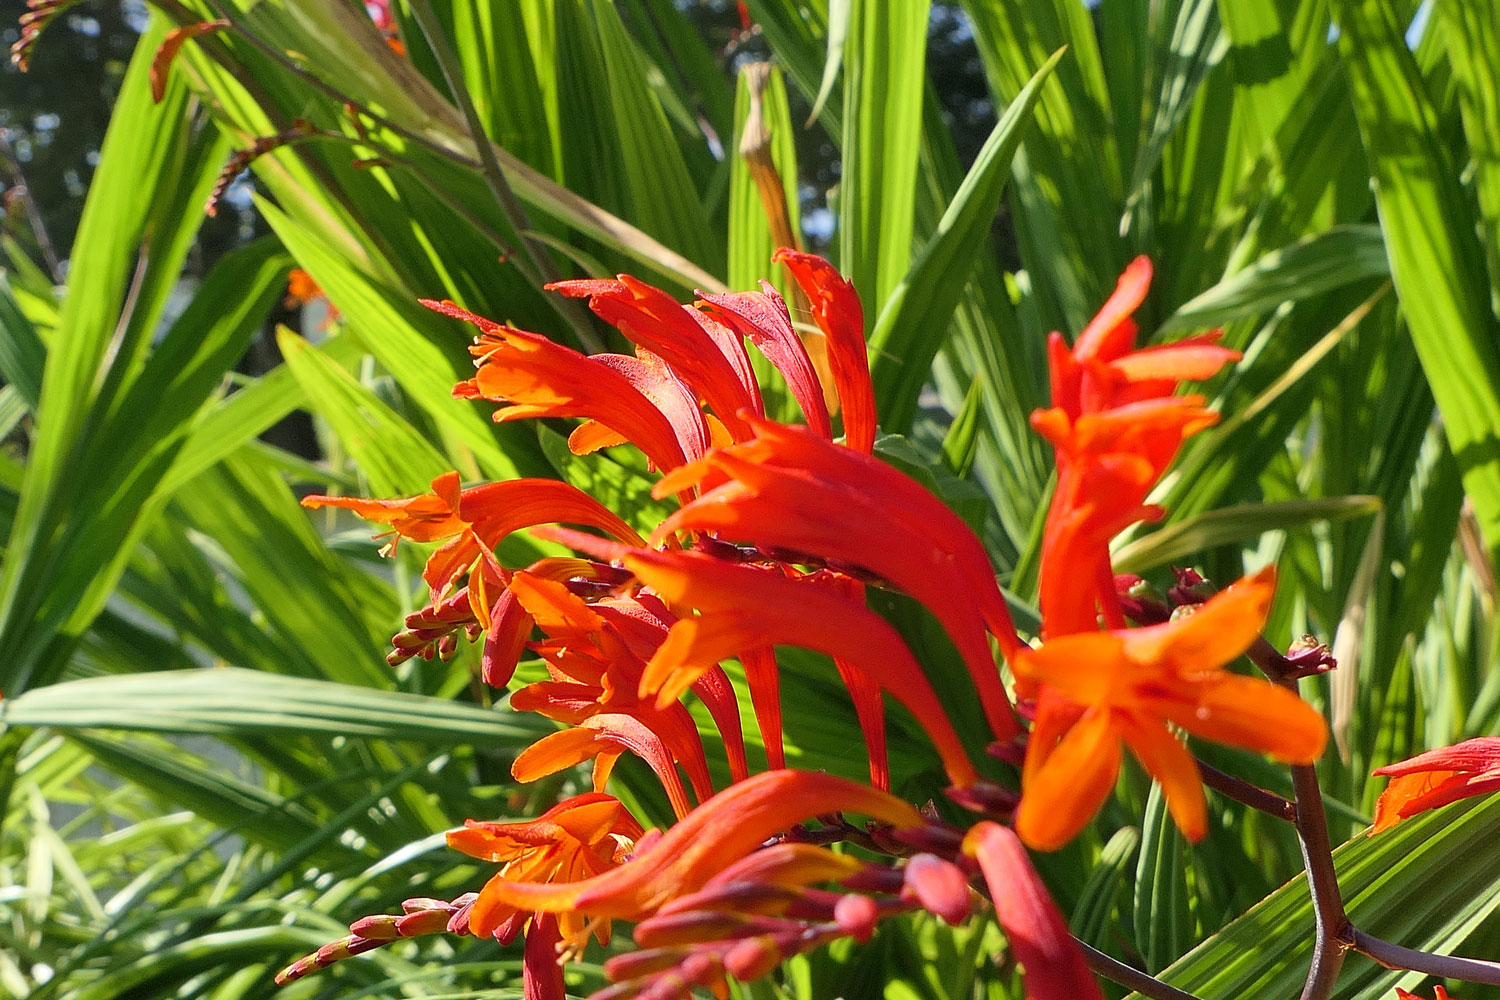 Crocosmia Lucifer red Montbretia small genus of flowering plants in the iris family Iridaceae growing in a garden 